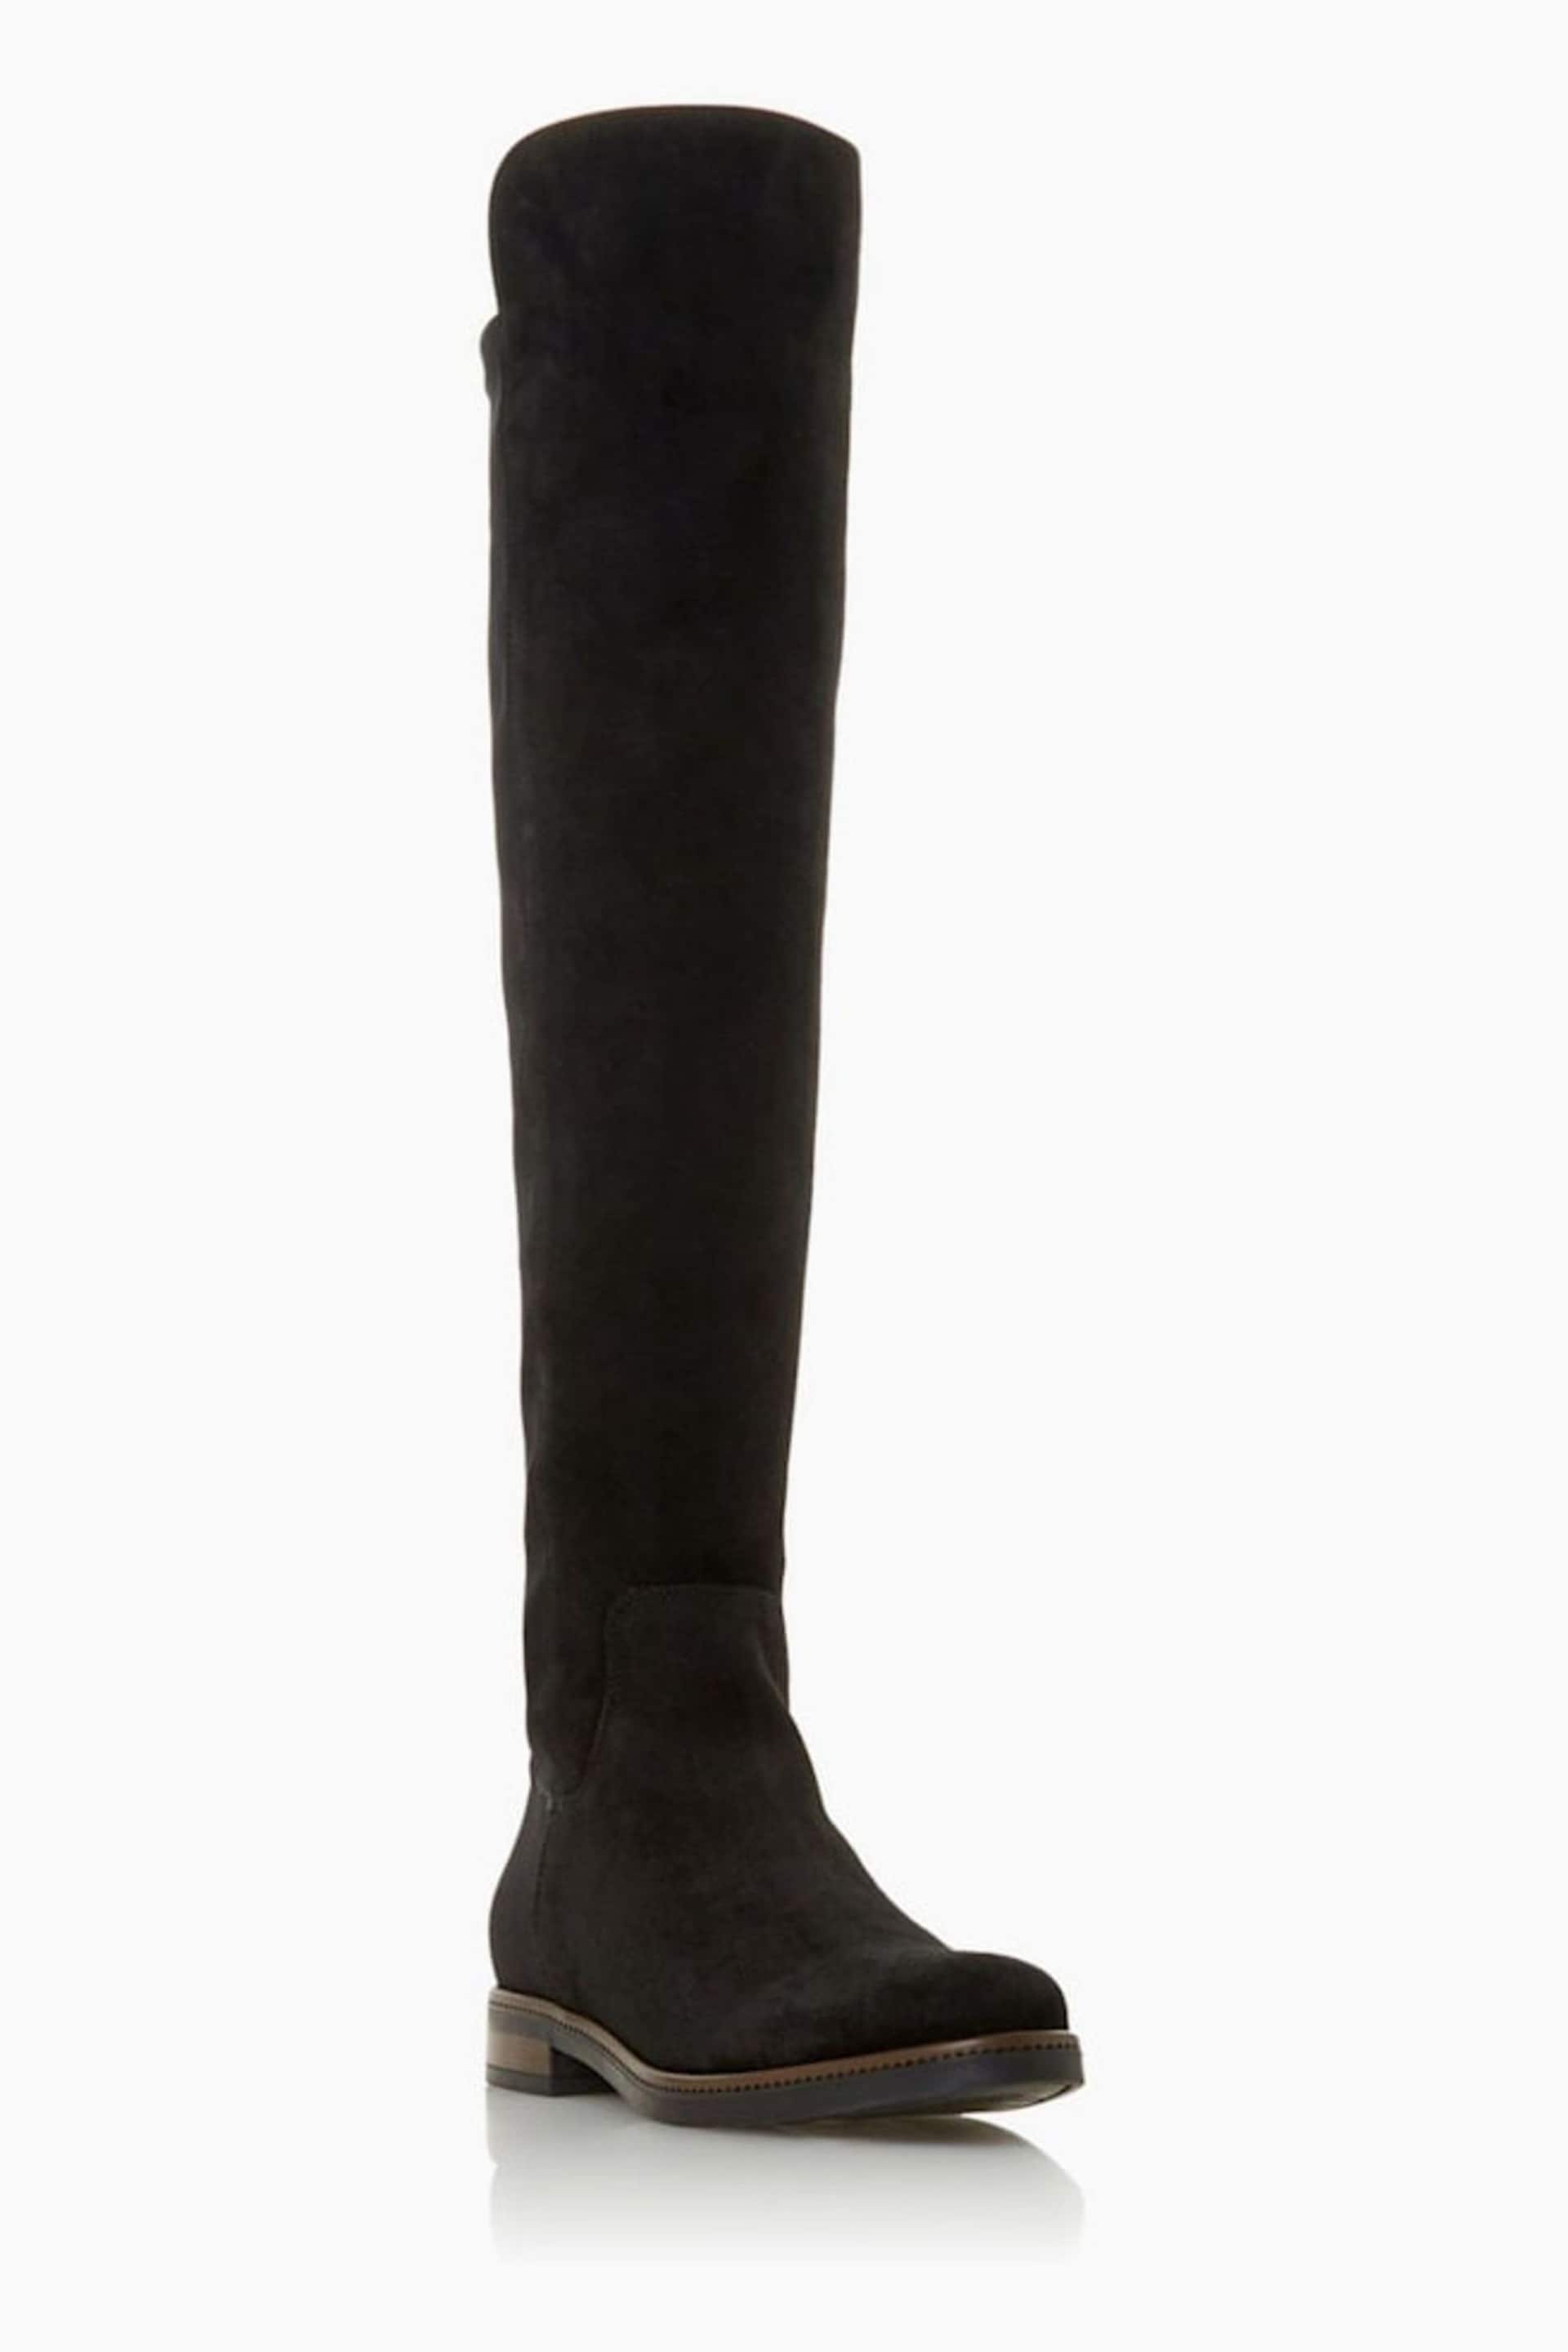 Dune London Black Tropic Over The Knee Suede Stretch Boots - Image 1 of 6